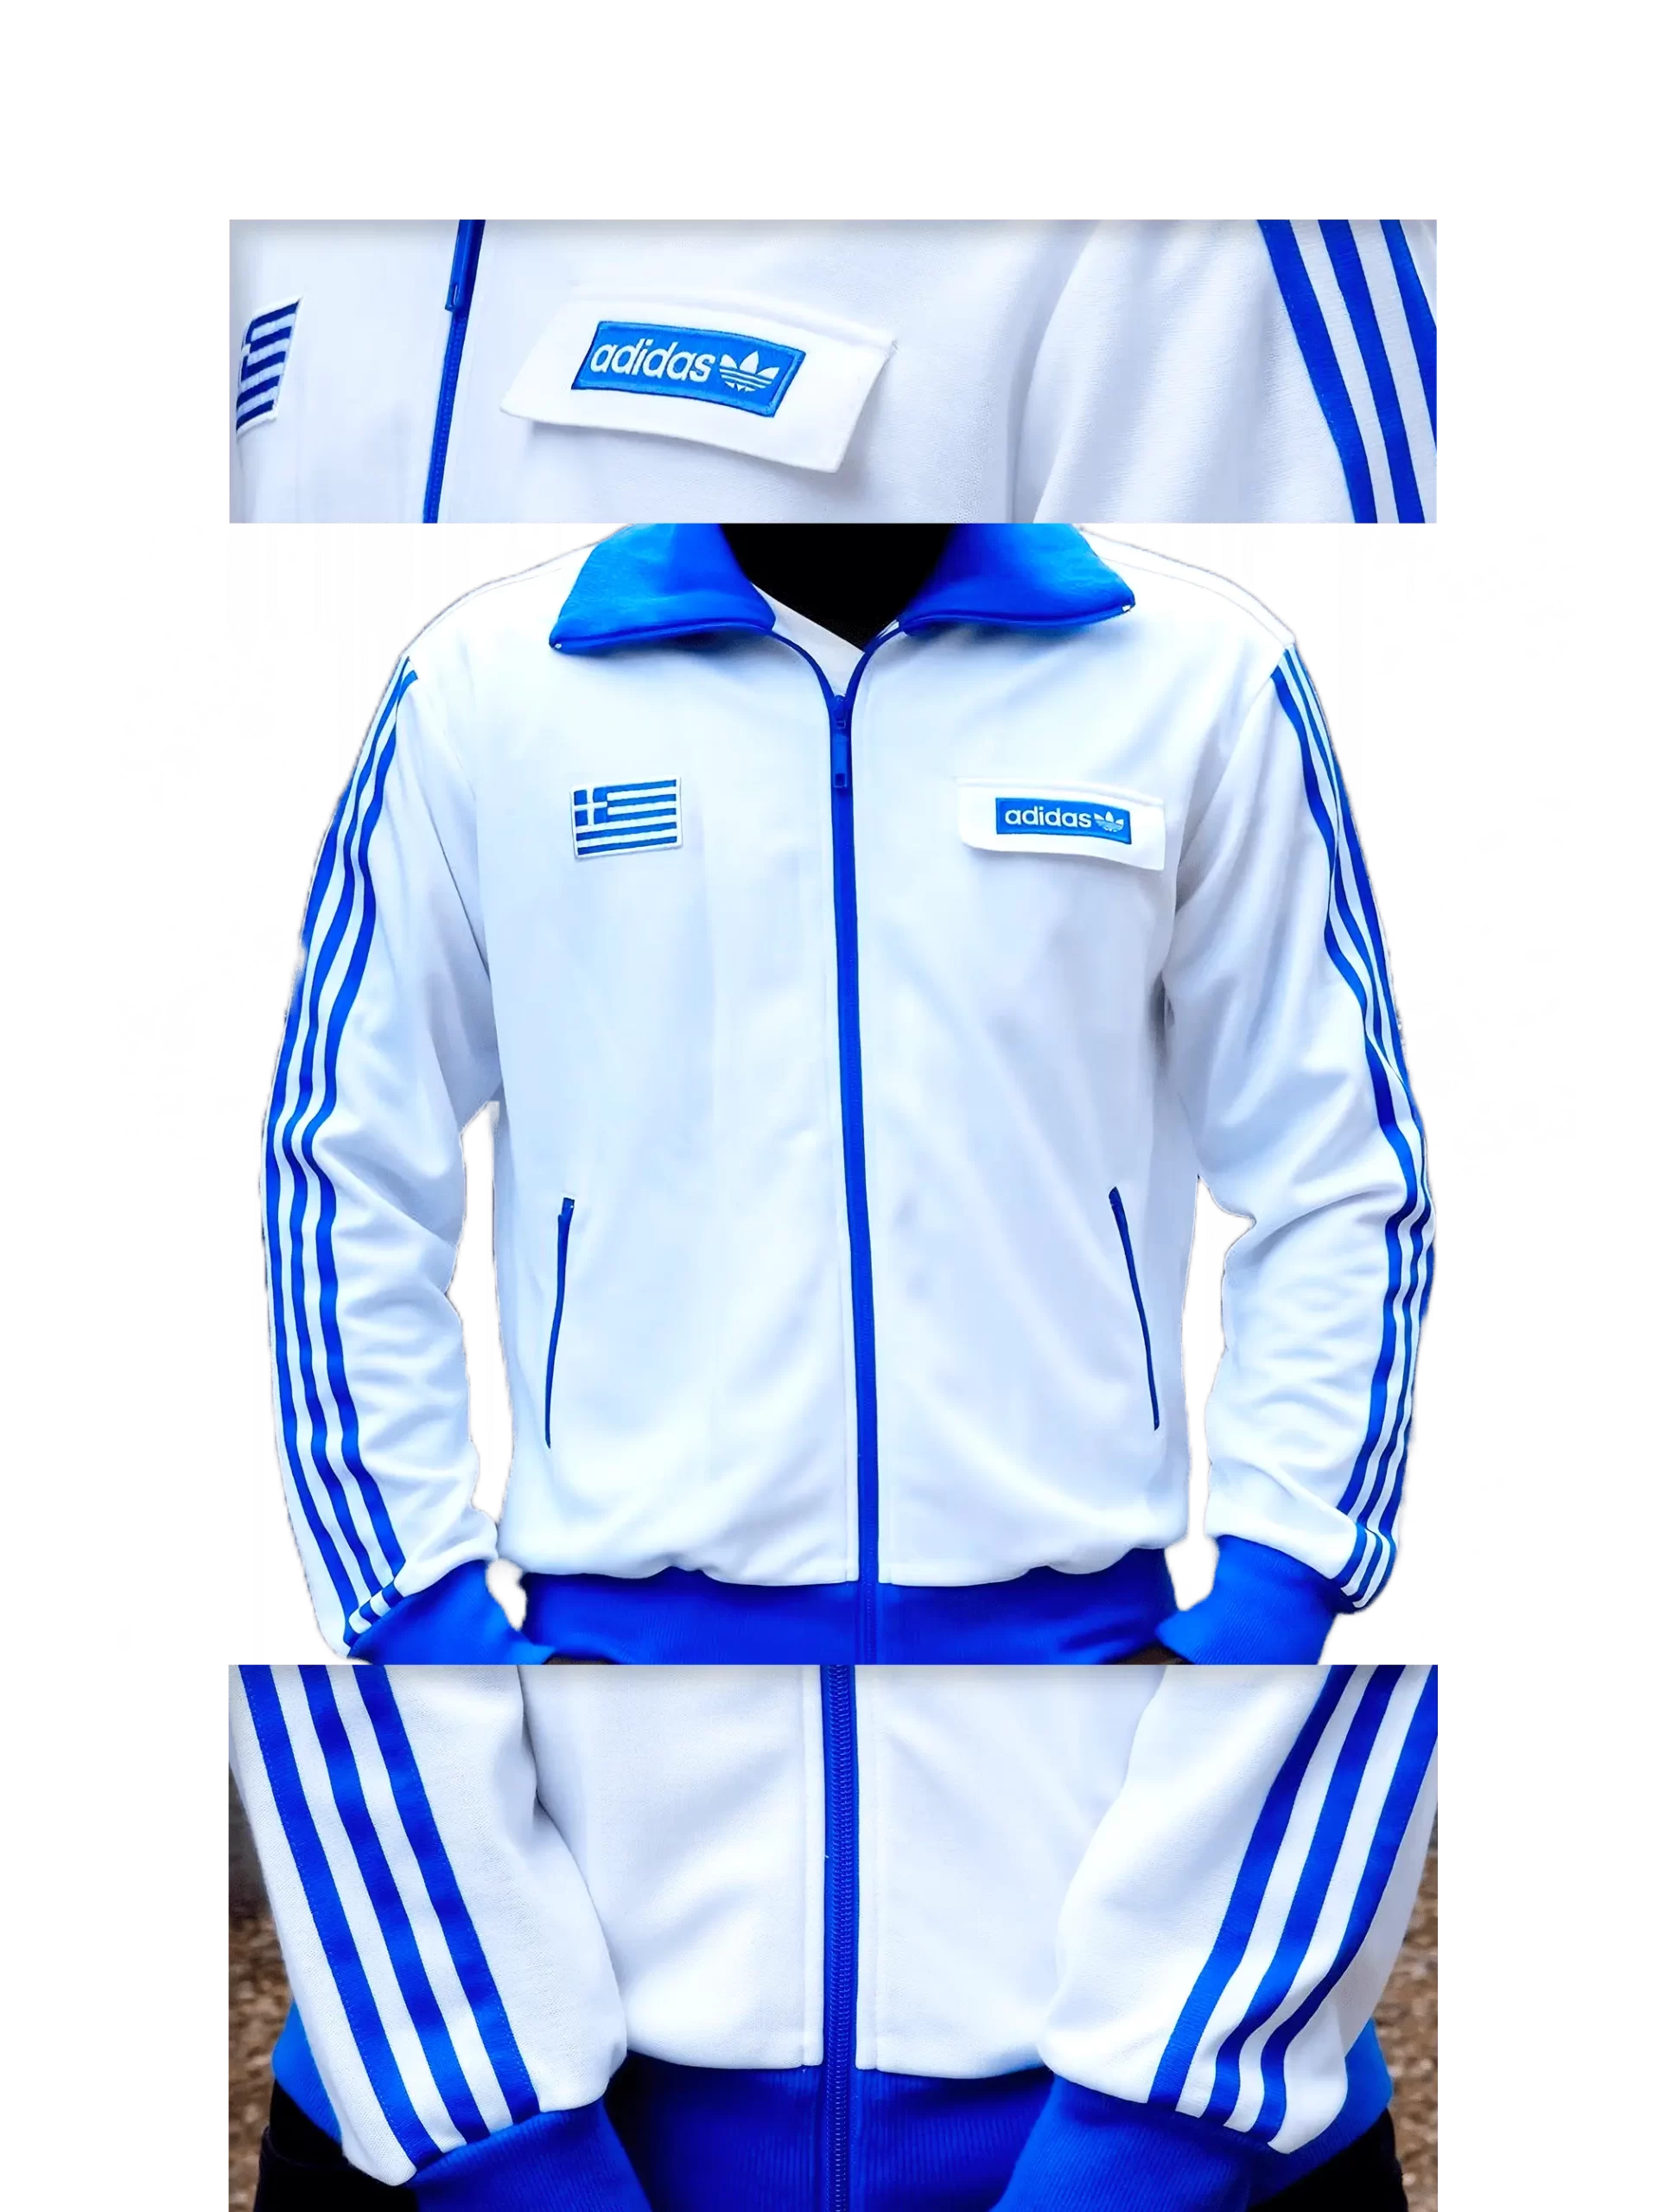 Men's 2003 Greece Track Top by Adidas: Natural (EnLawded.com file #lmchk82306ip2y125199kg9st)